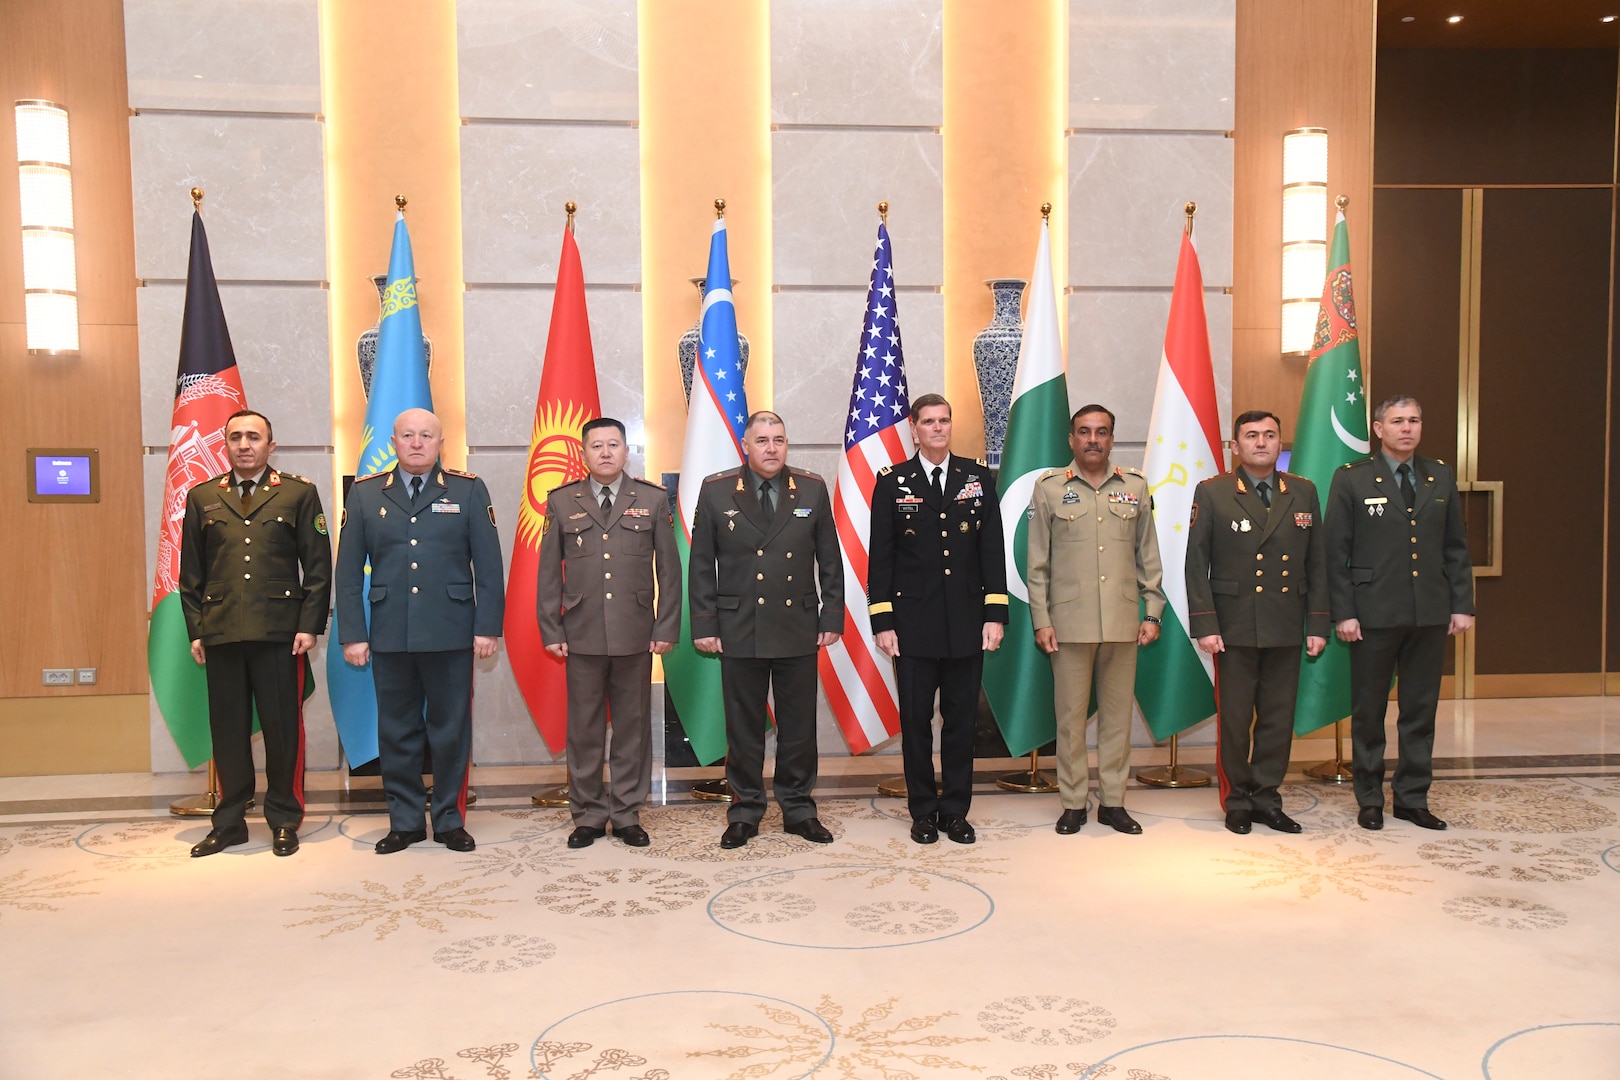 General Joseph Votel, U.S. Central Command commander with the Chiefs of Defense for the Central Asian states meeting in Tashkent, Uzbekistan.